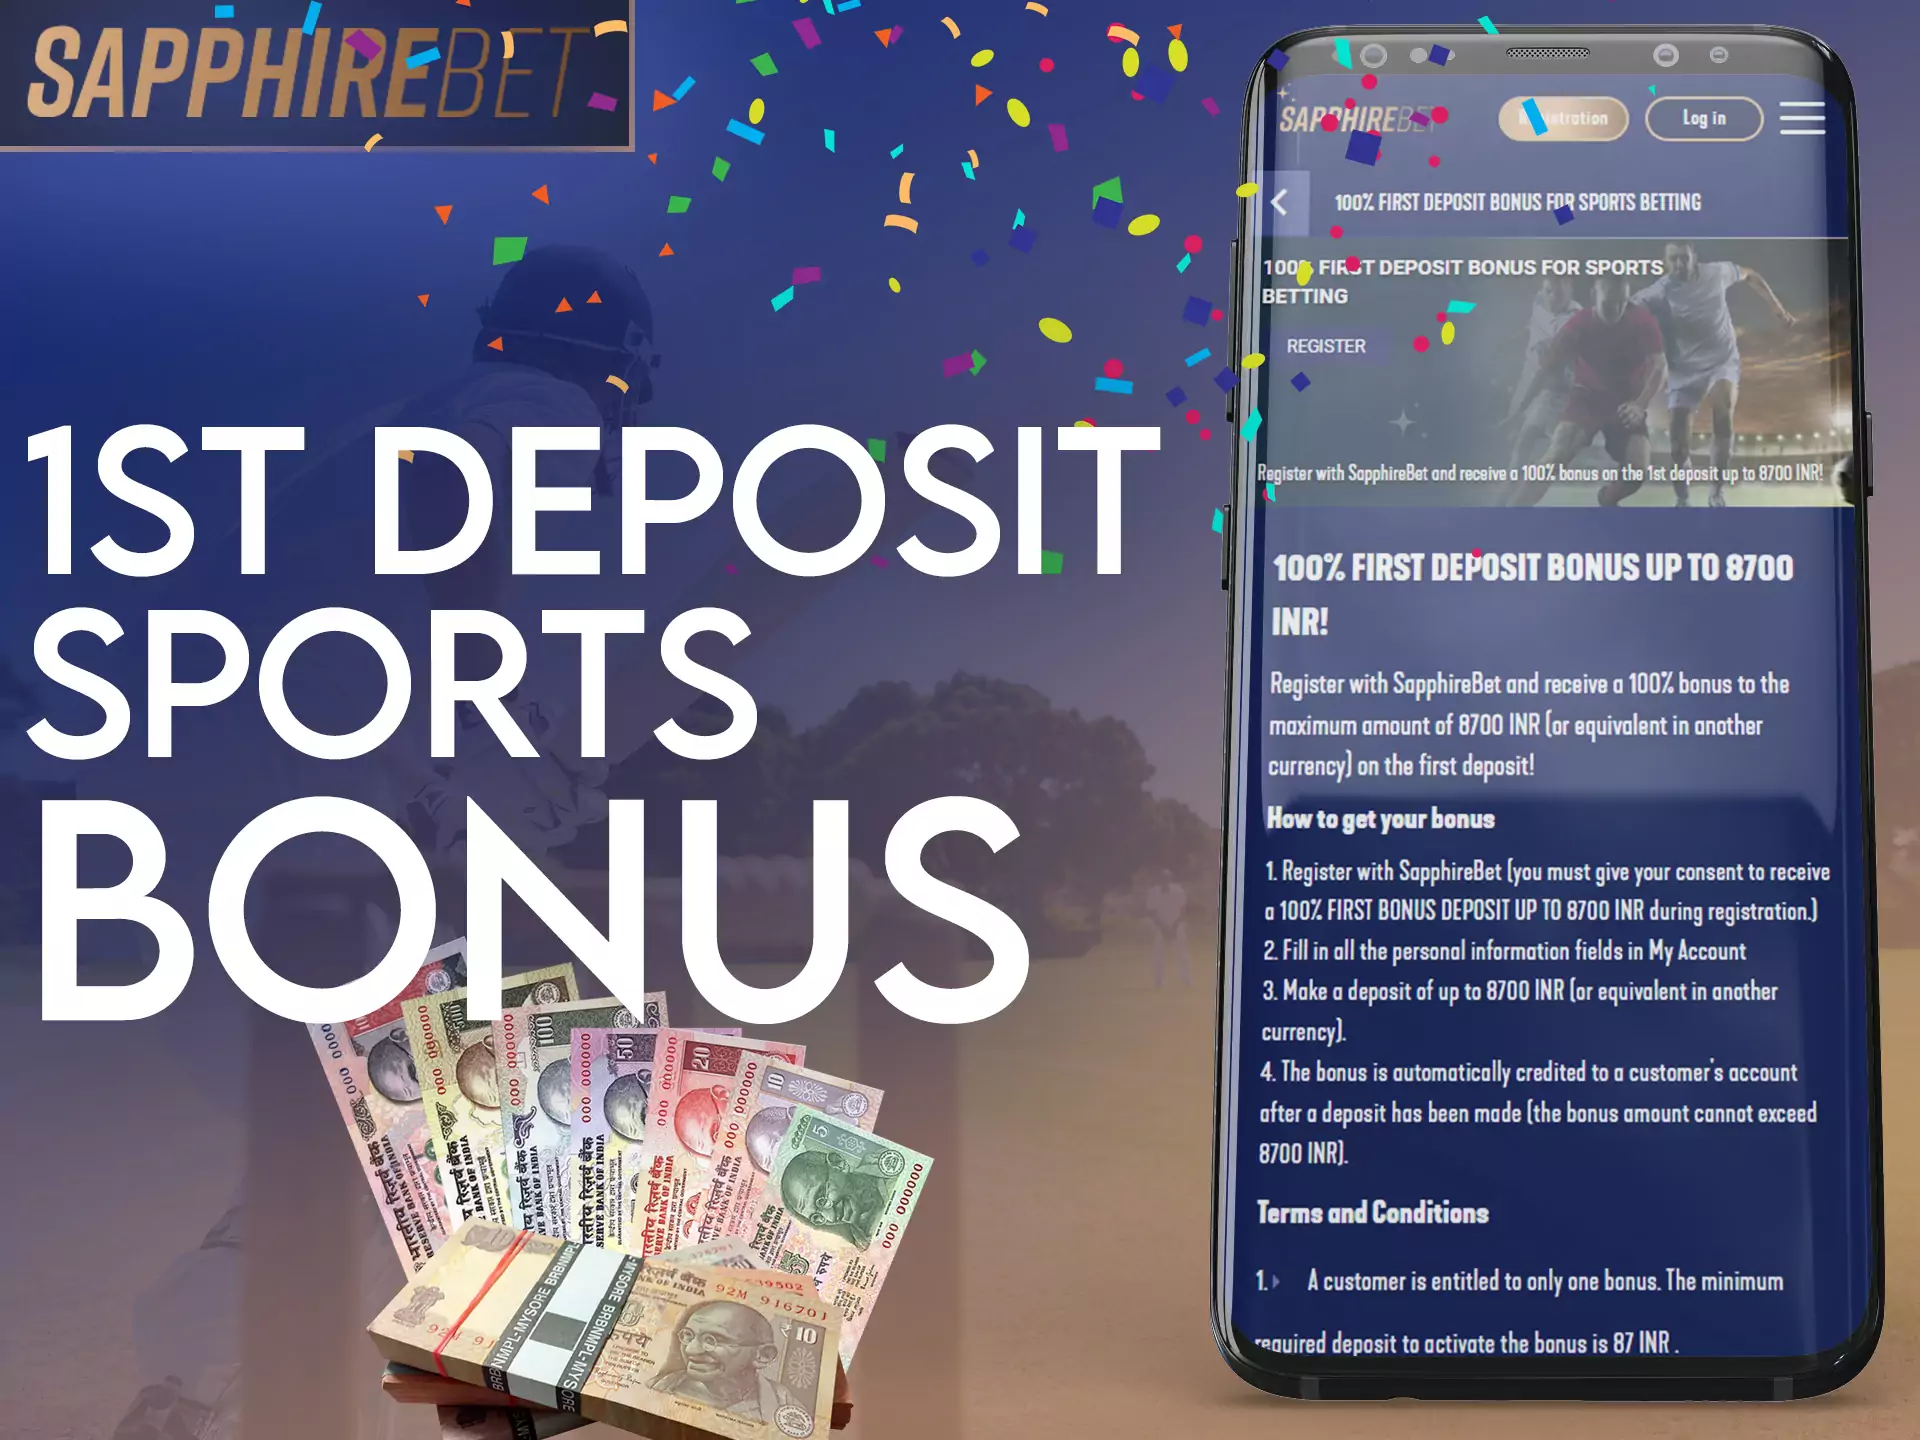 In the Sapphirebet app, get a special bonus for your first deposit.